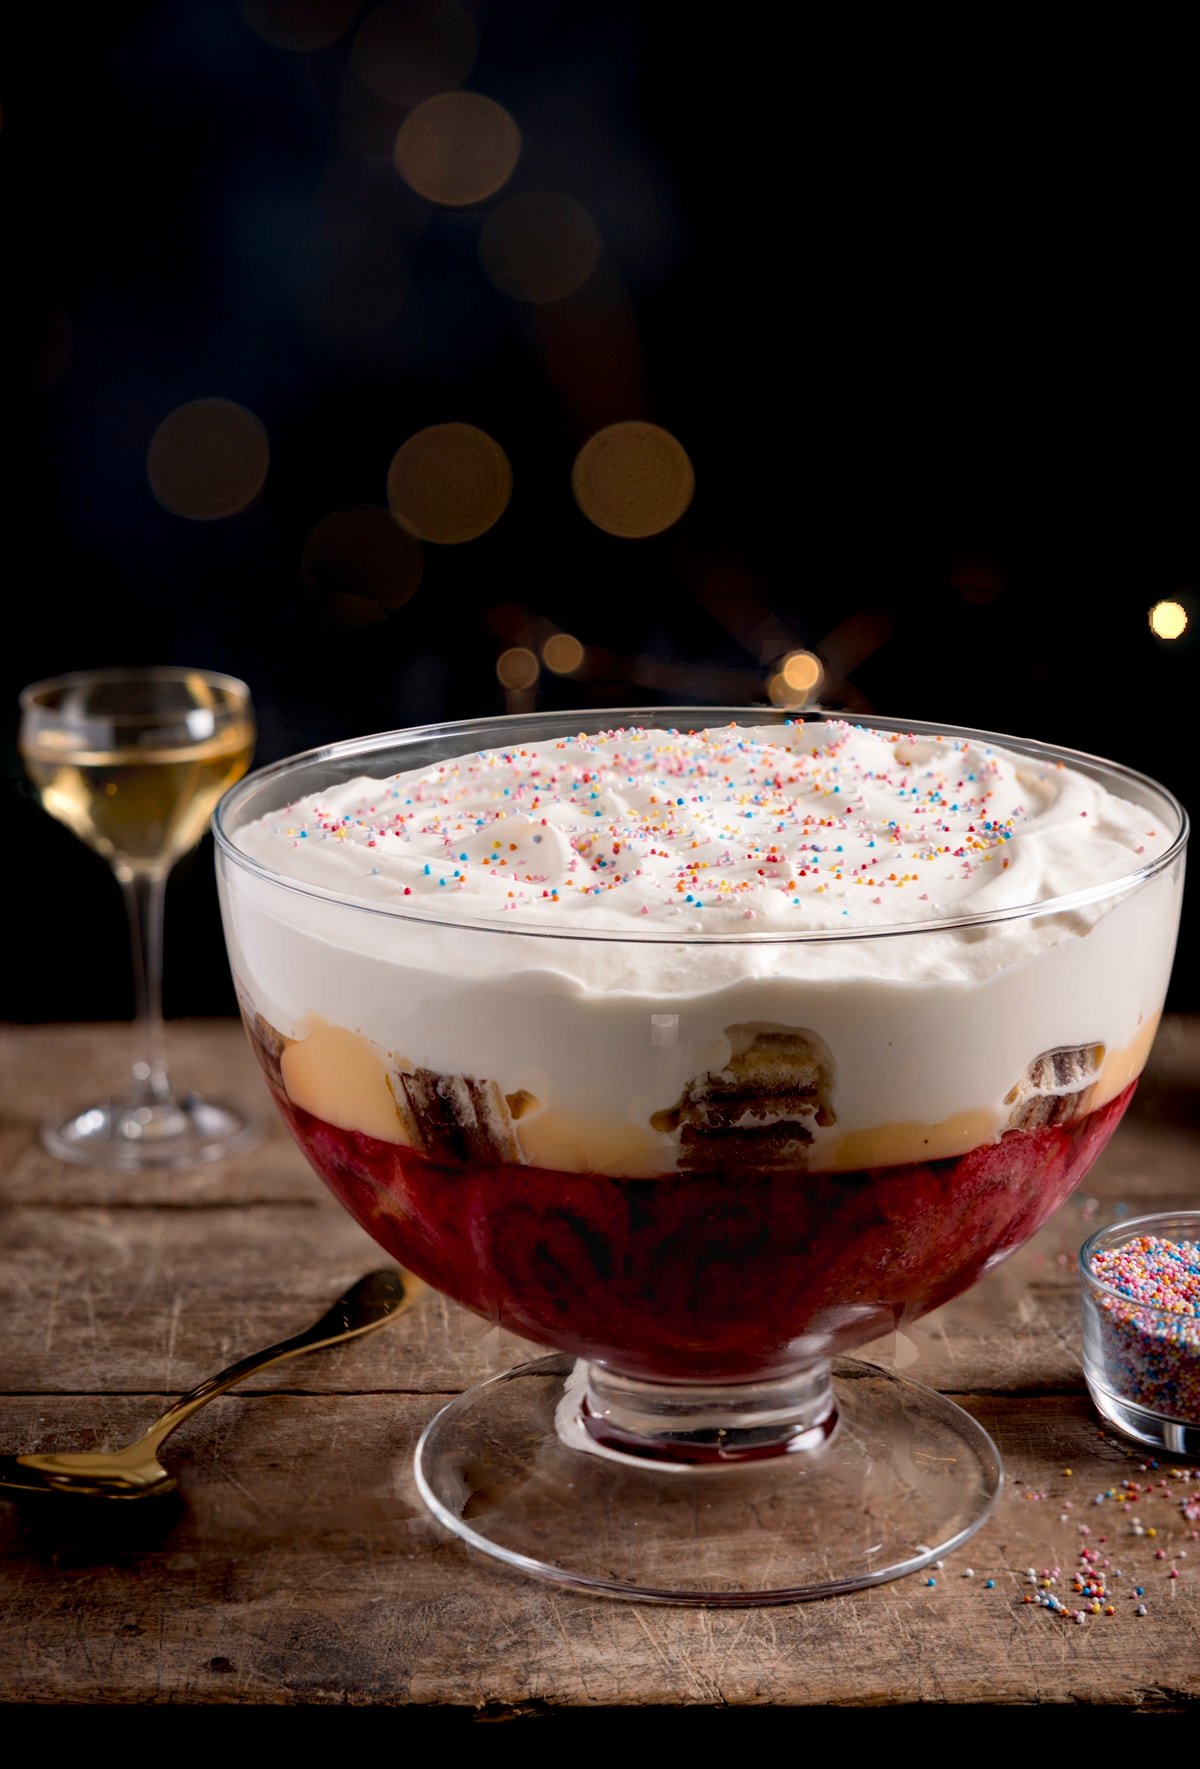 Sherry trifle in a large glass dish on a wooden table against a dark background. There is a glass of sherry and a bowl of sprinkles also in shot.